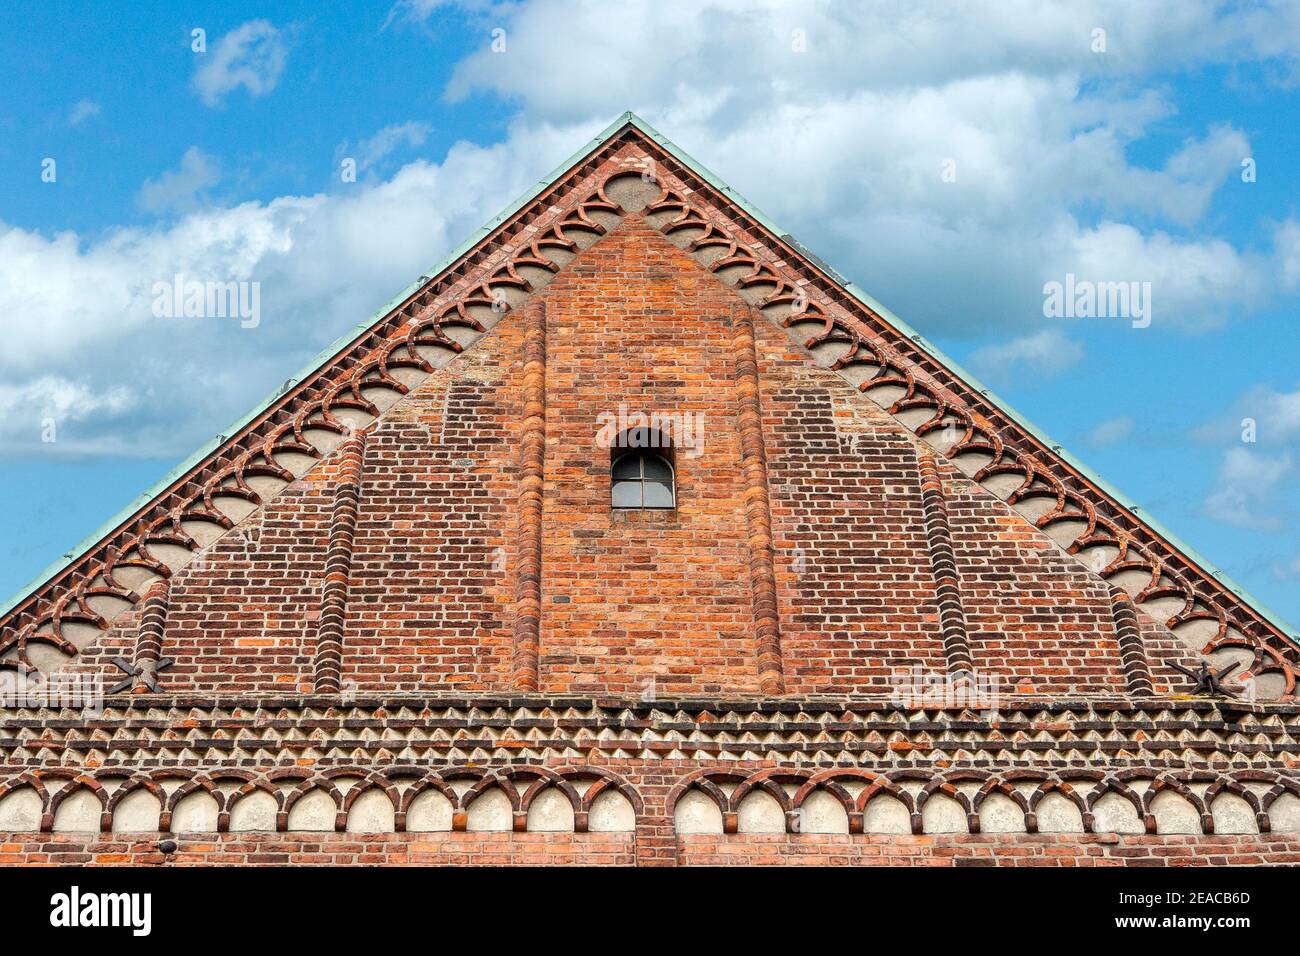 Germany, SH Schleswig-Holstein, Ratzeburg, Ratzeburg Cathedral, built in the 12th century, southern transept gable. The cathedral is one of the oldest church buildings in Schleswig-Holstein. Ratzeburg is located in the Lauenburg Lakes Nature Park. Stock Photo